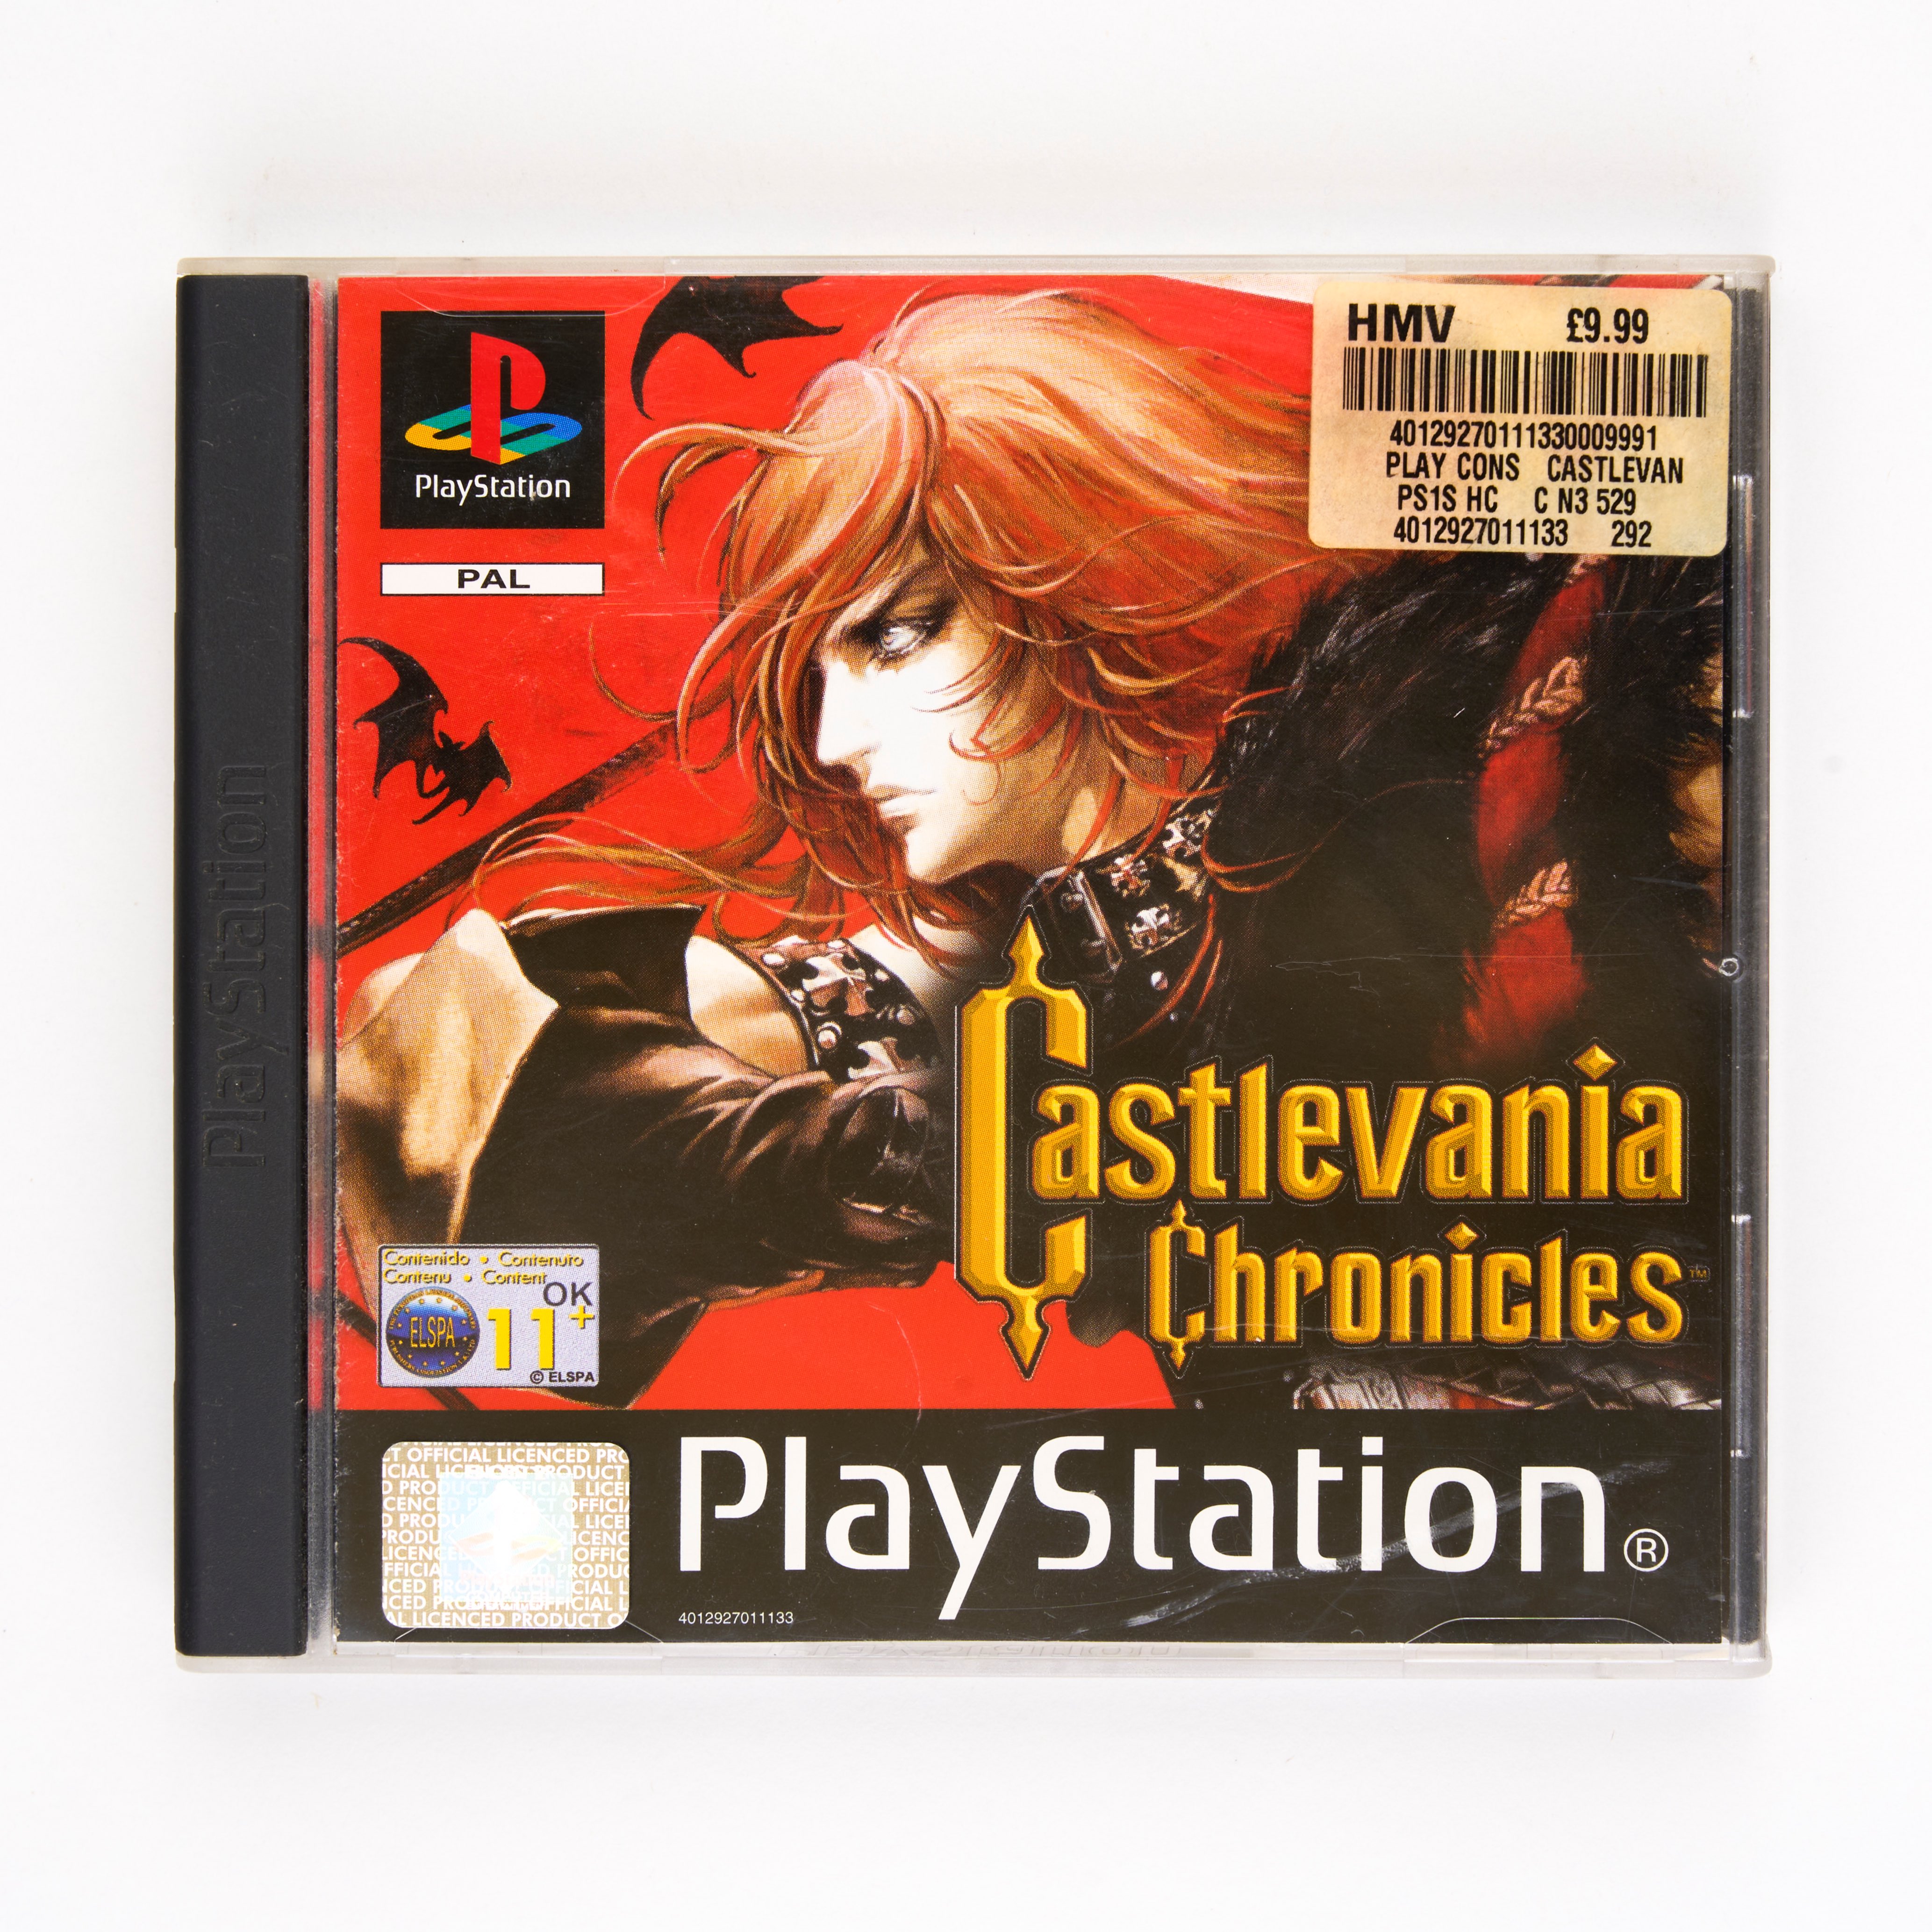 Sony - Castlevania Chronicles PAL - Playstation - Complete In Box